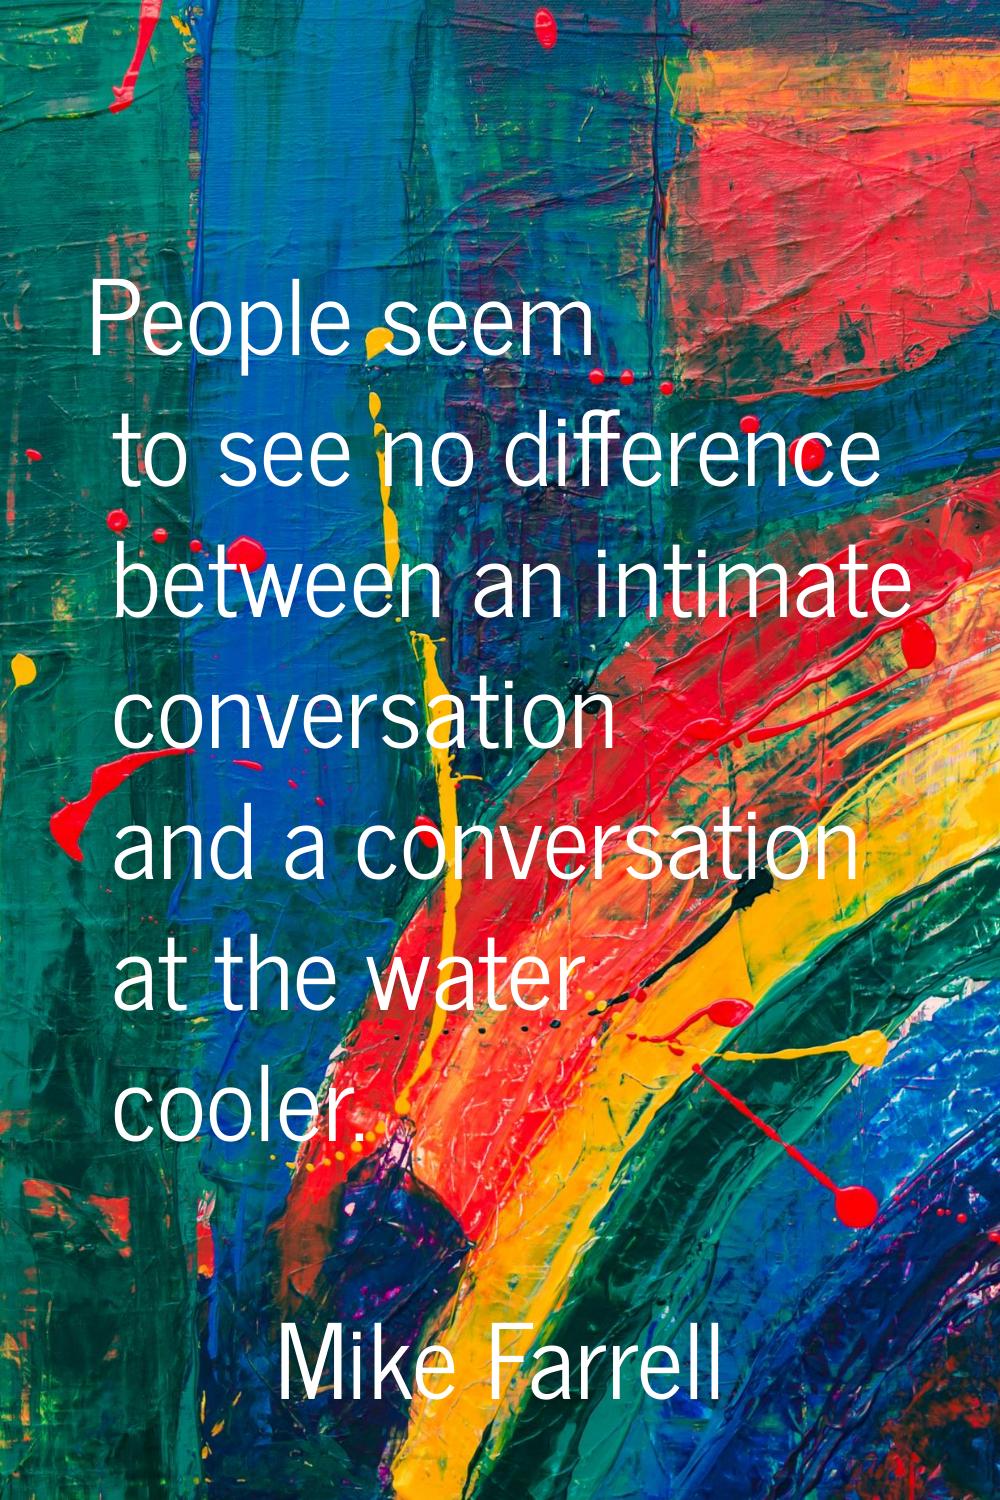 People seem to see no difference between an intimate conversation and a conversation at the water c